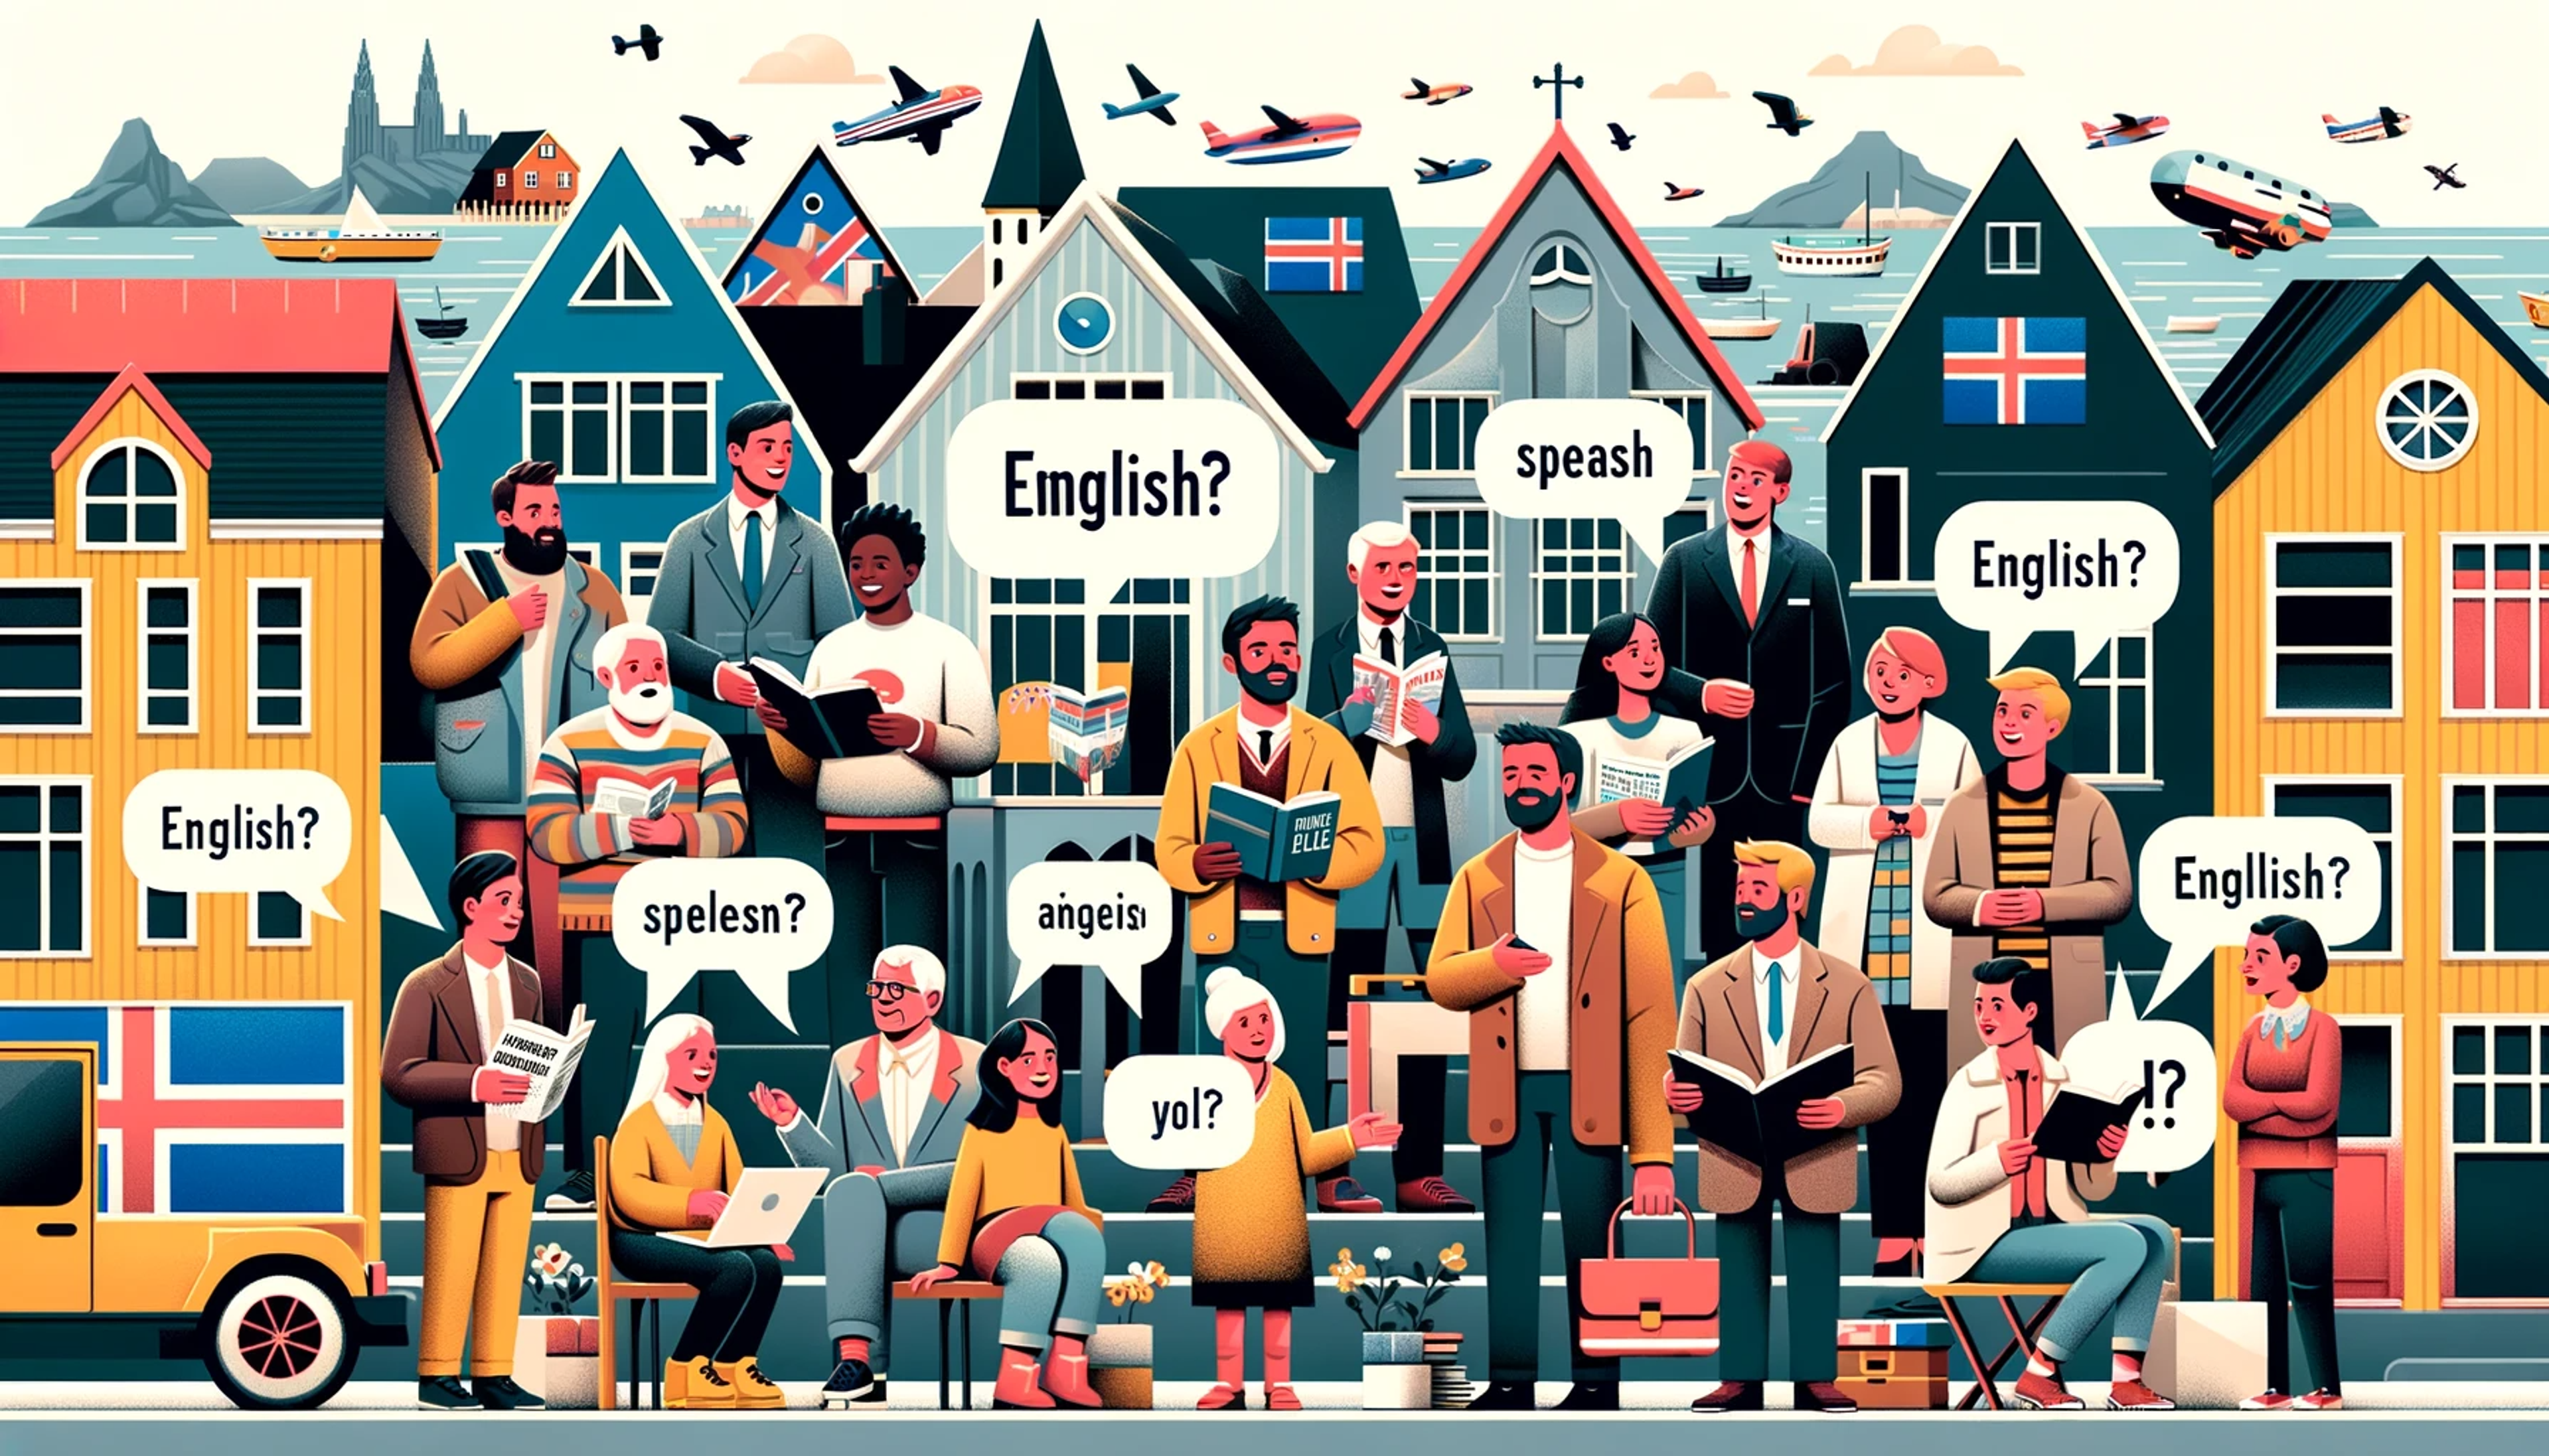 People asking if they speak English in iceland